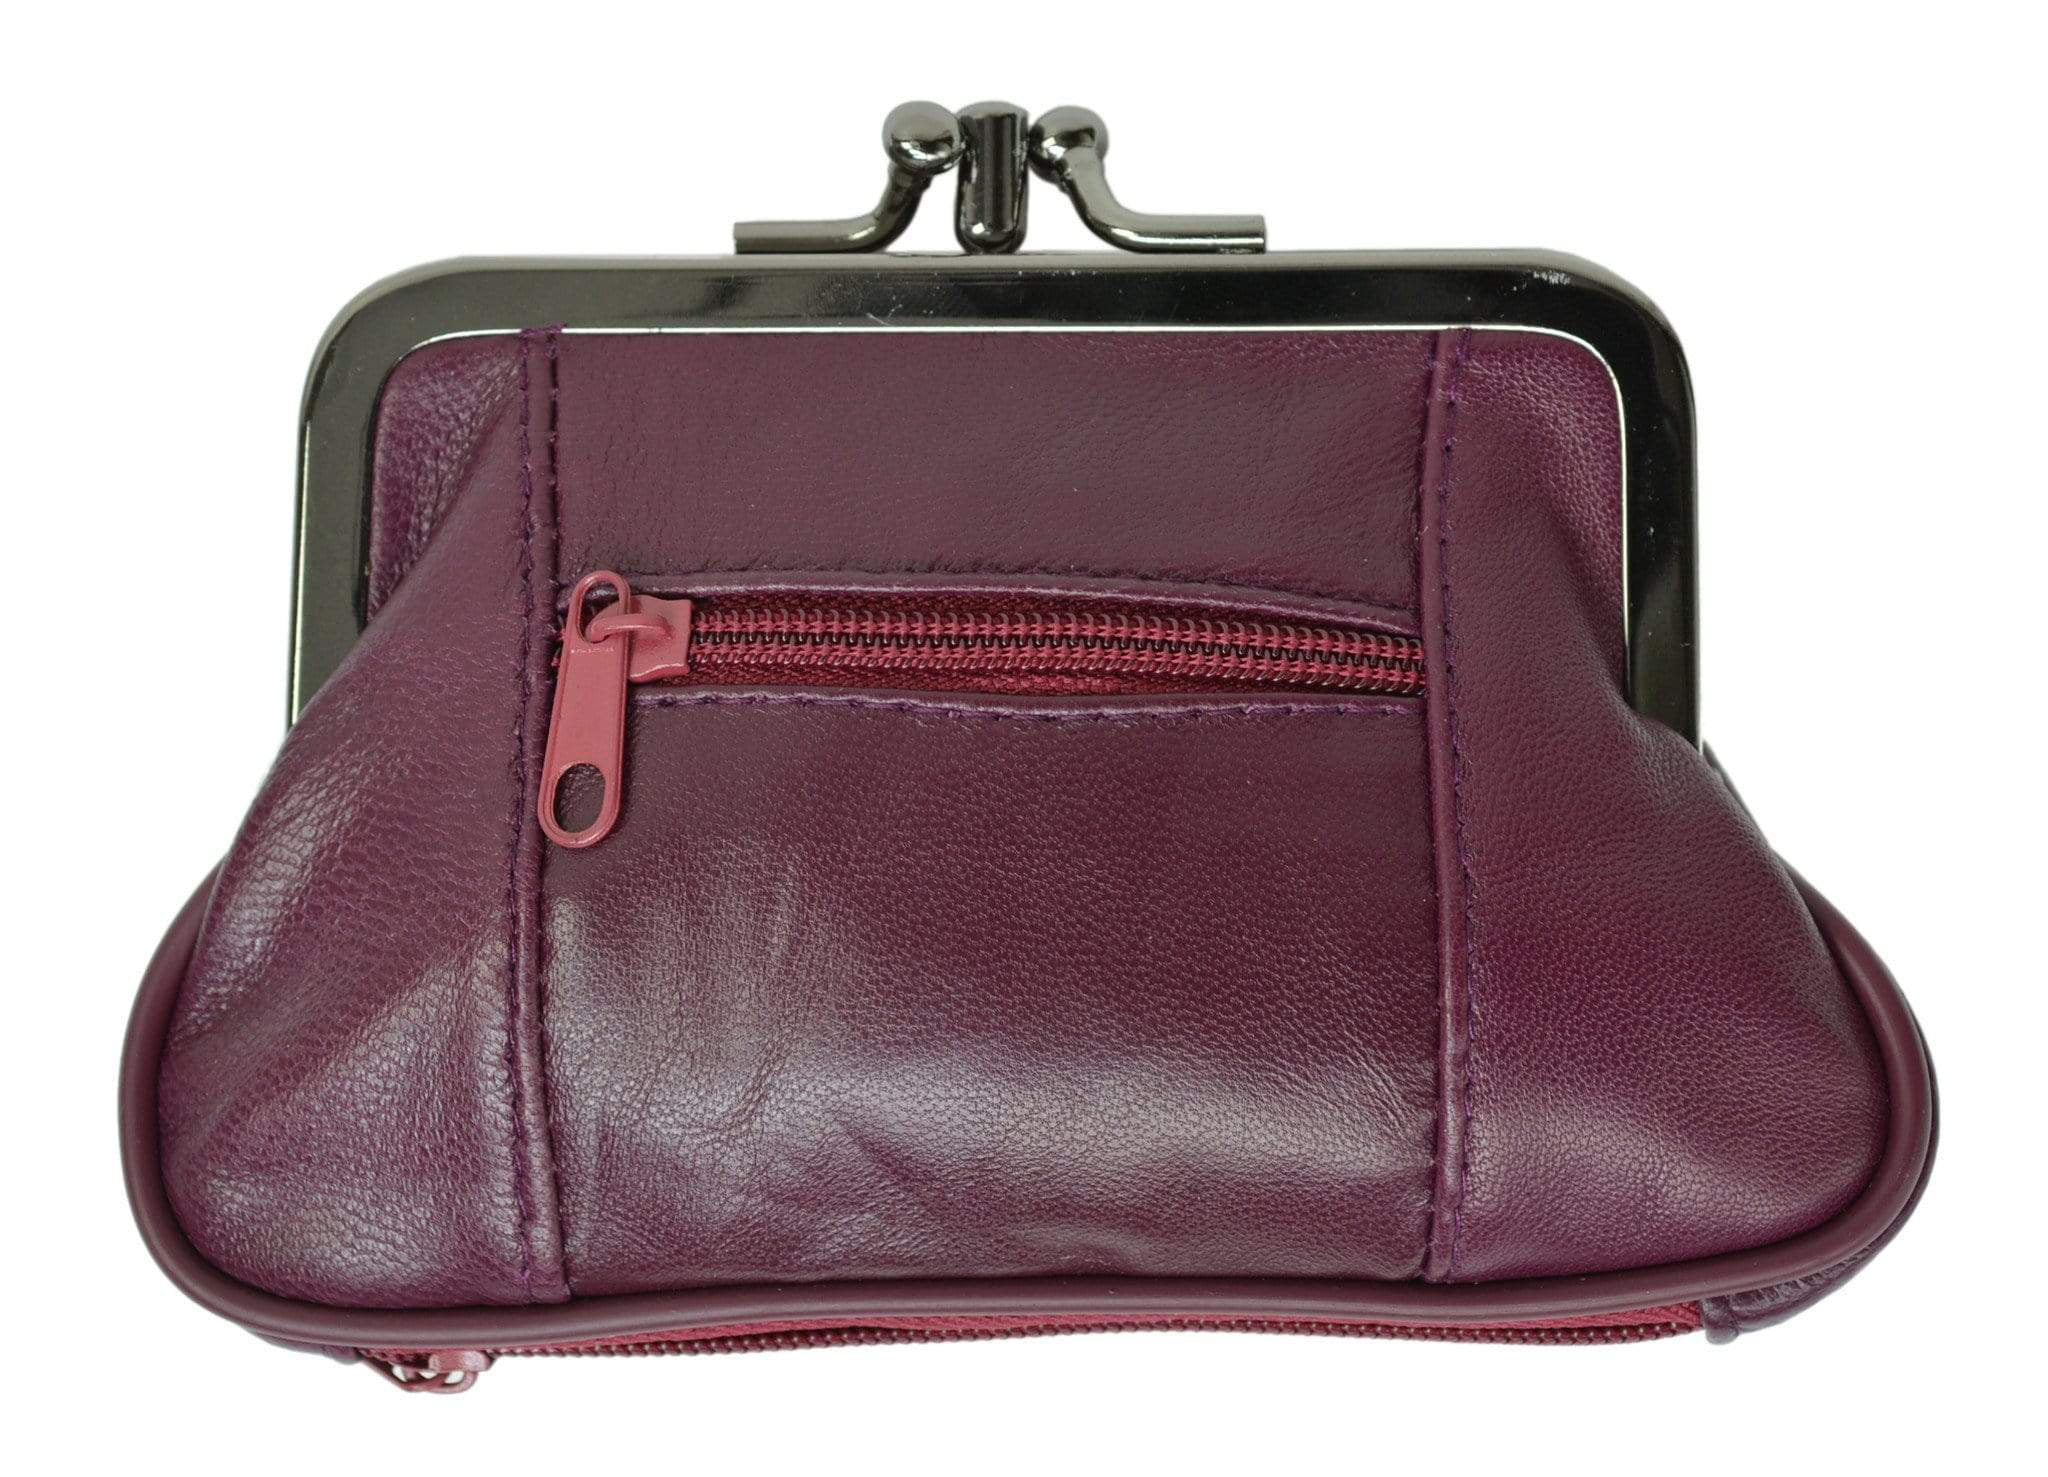 Genuine Leather Change Purse with Zipper Bottom Compartment Y062 (C)